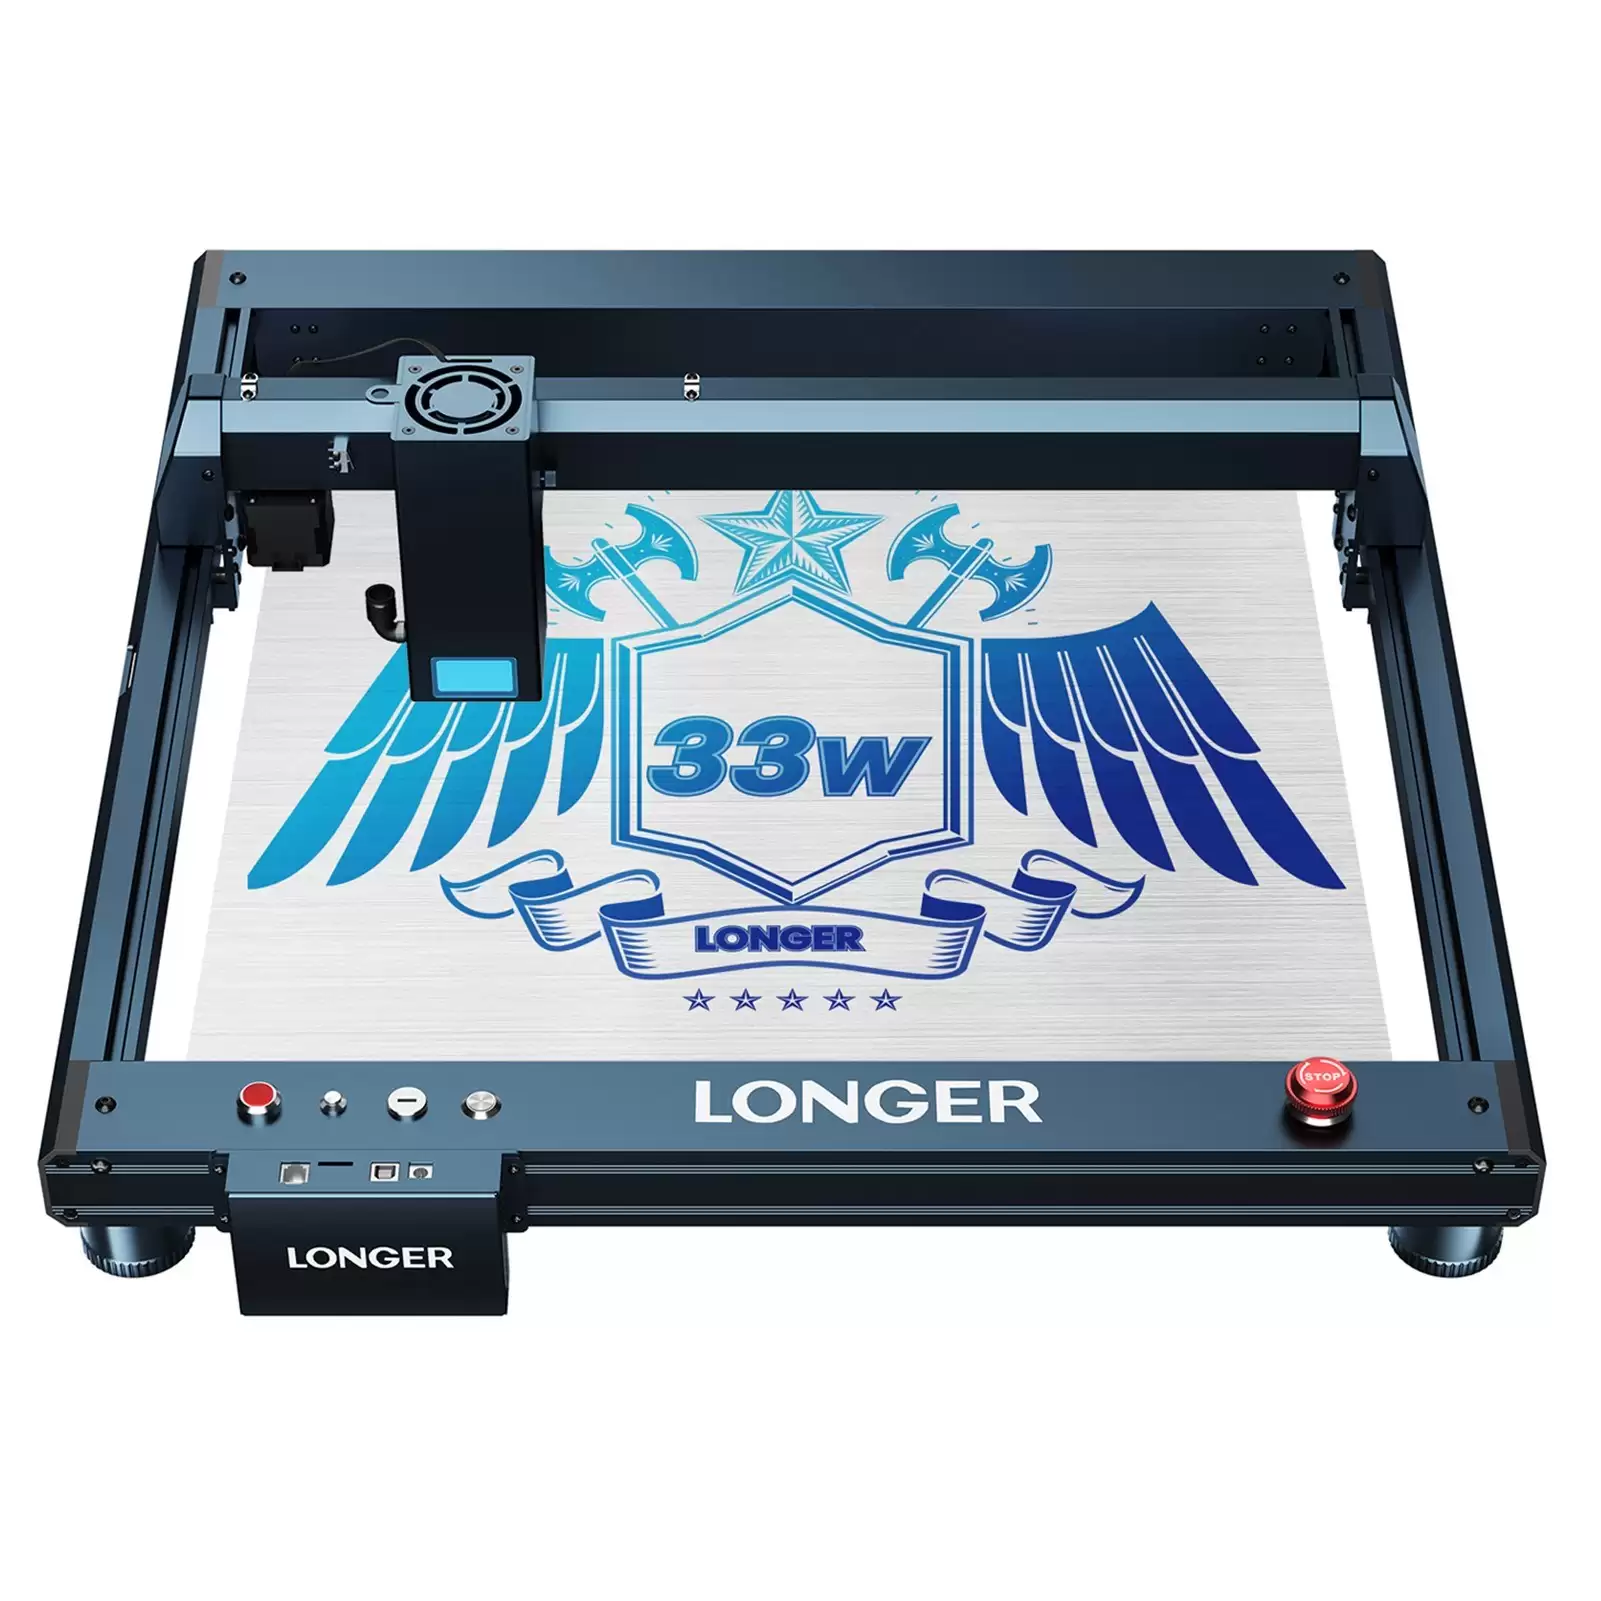 Order In Just $723 Longer Laser B1 30w Laser Engraver 36w Laser Power High Speed Engraving With Smart Air Assist System